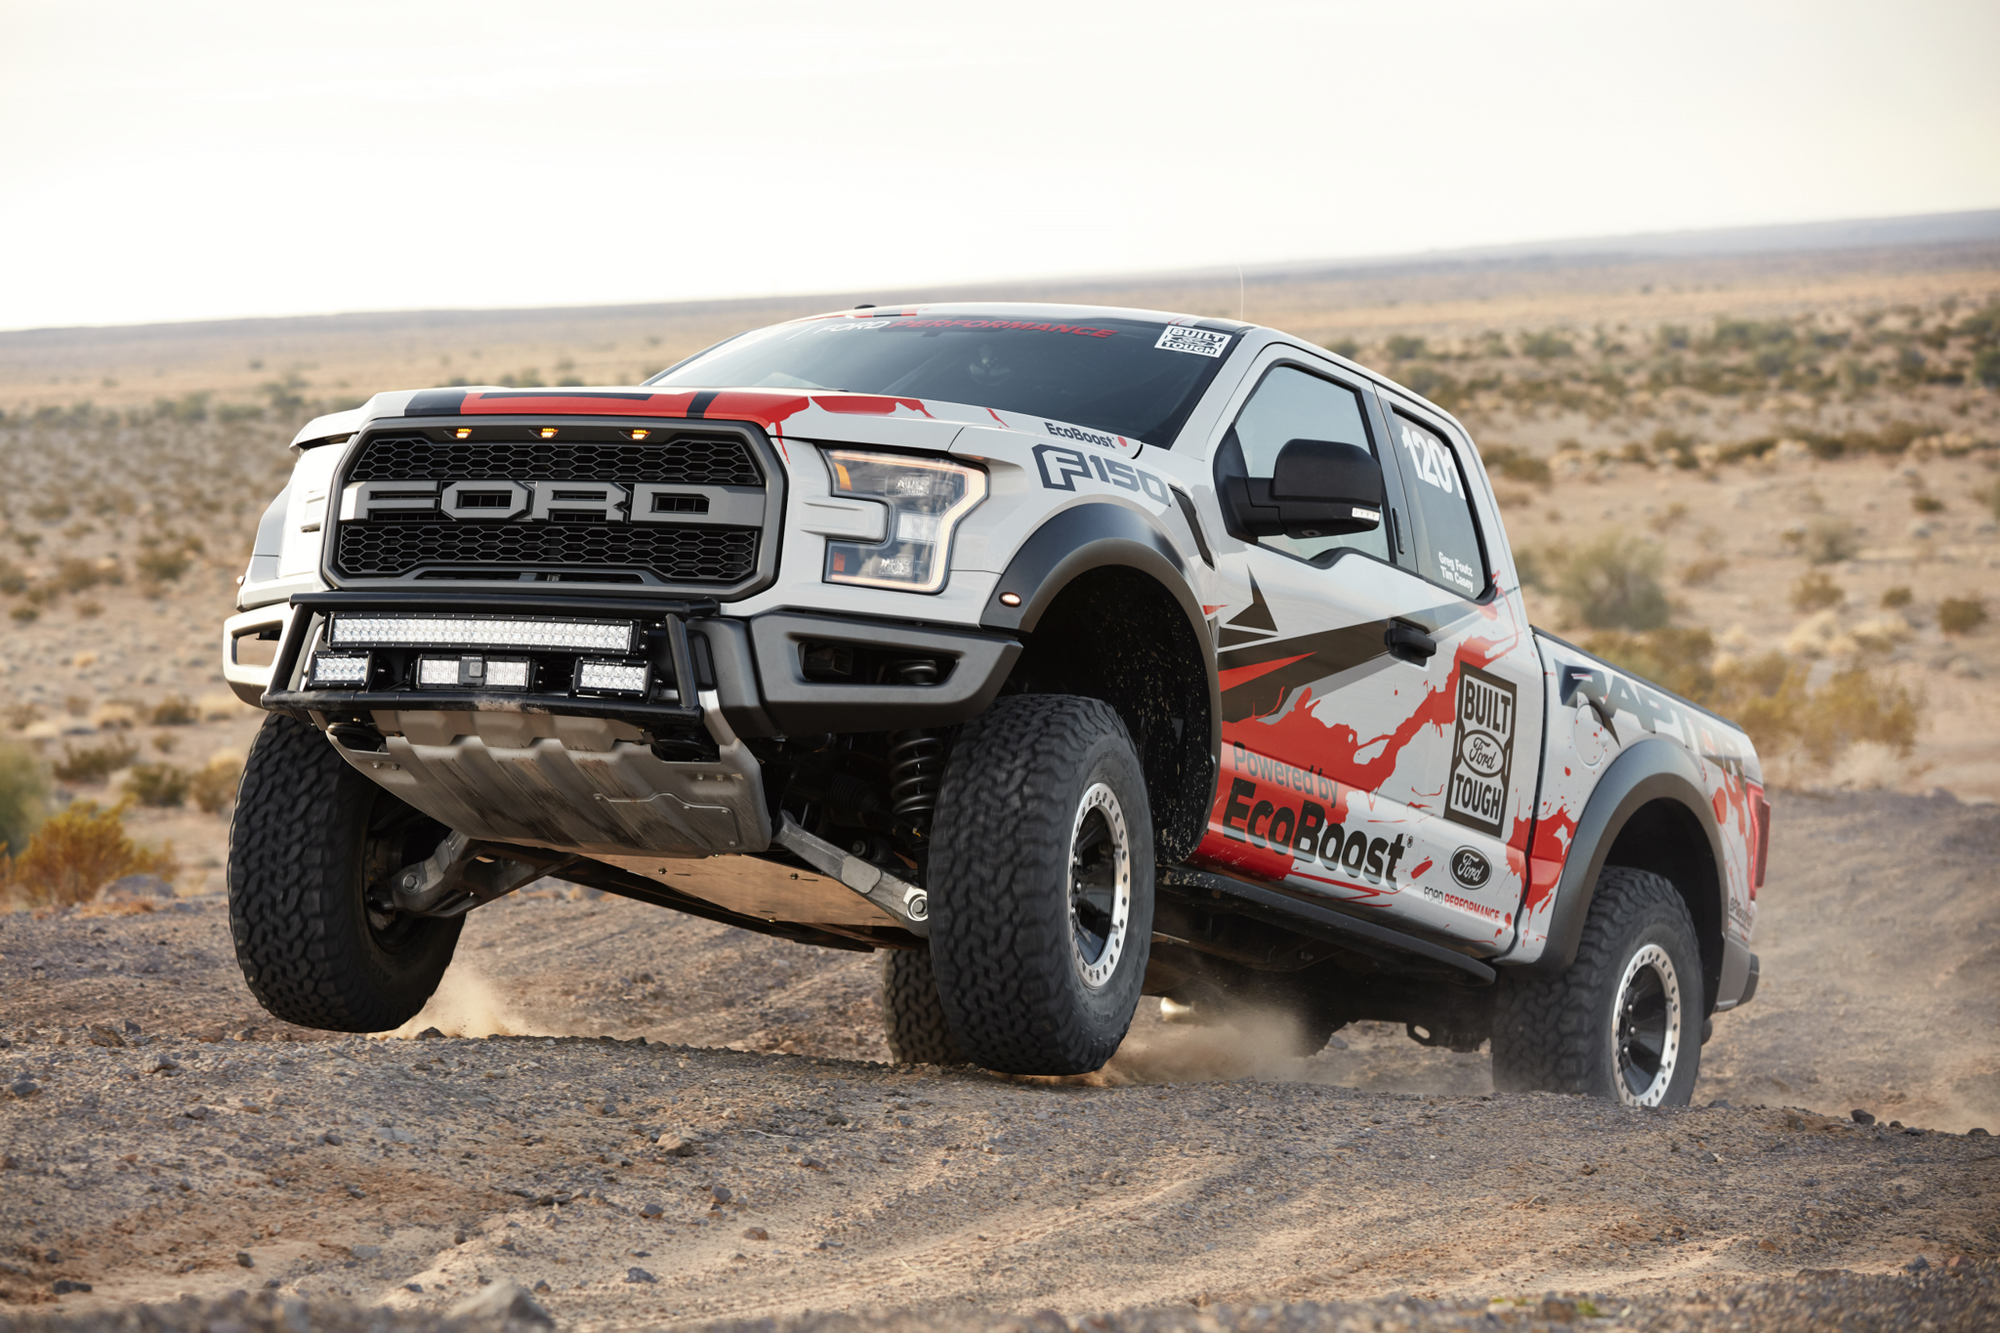 Foutz Motorsports chosen to race the all new 2017 Ford Raptor